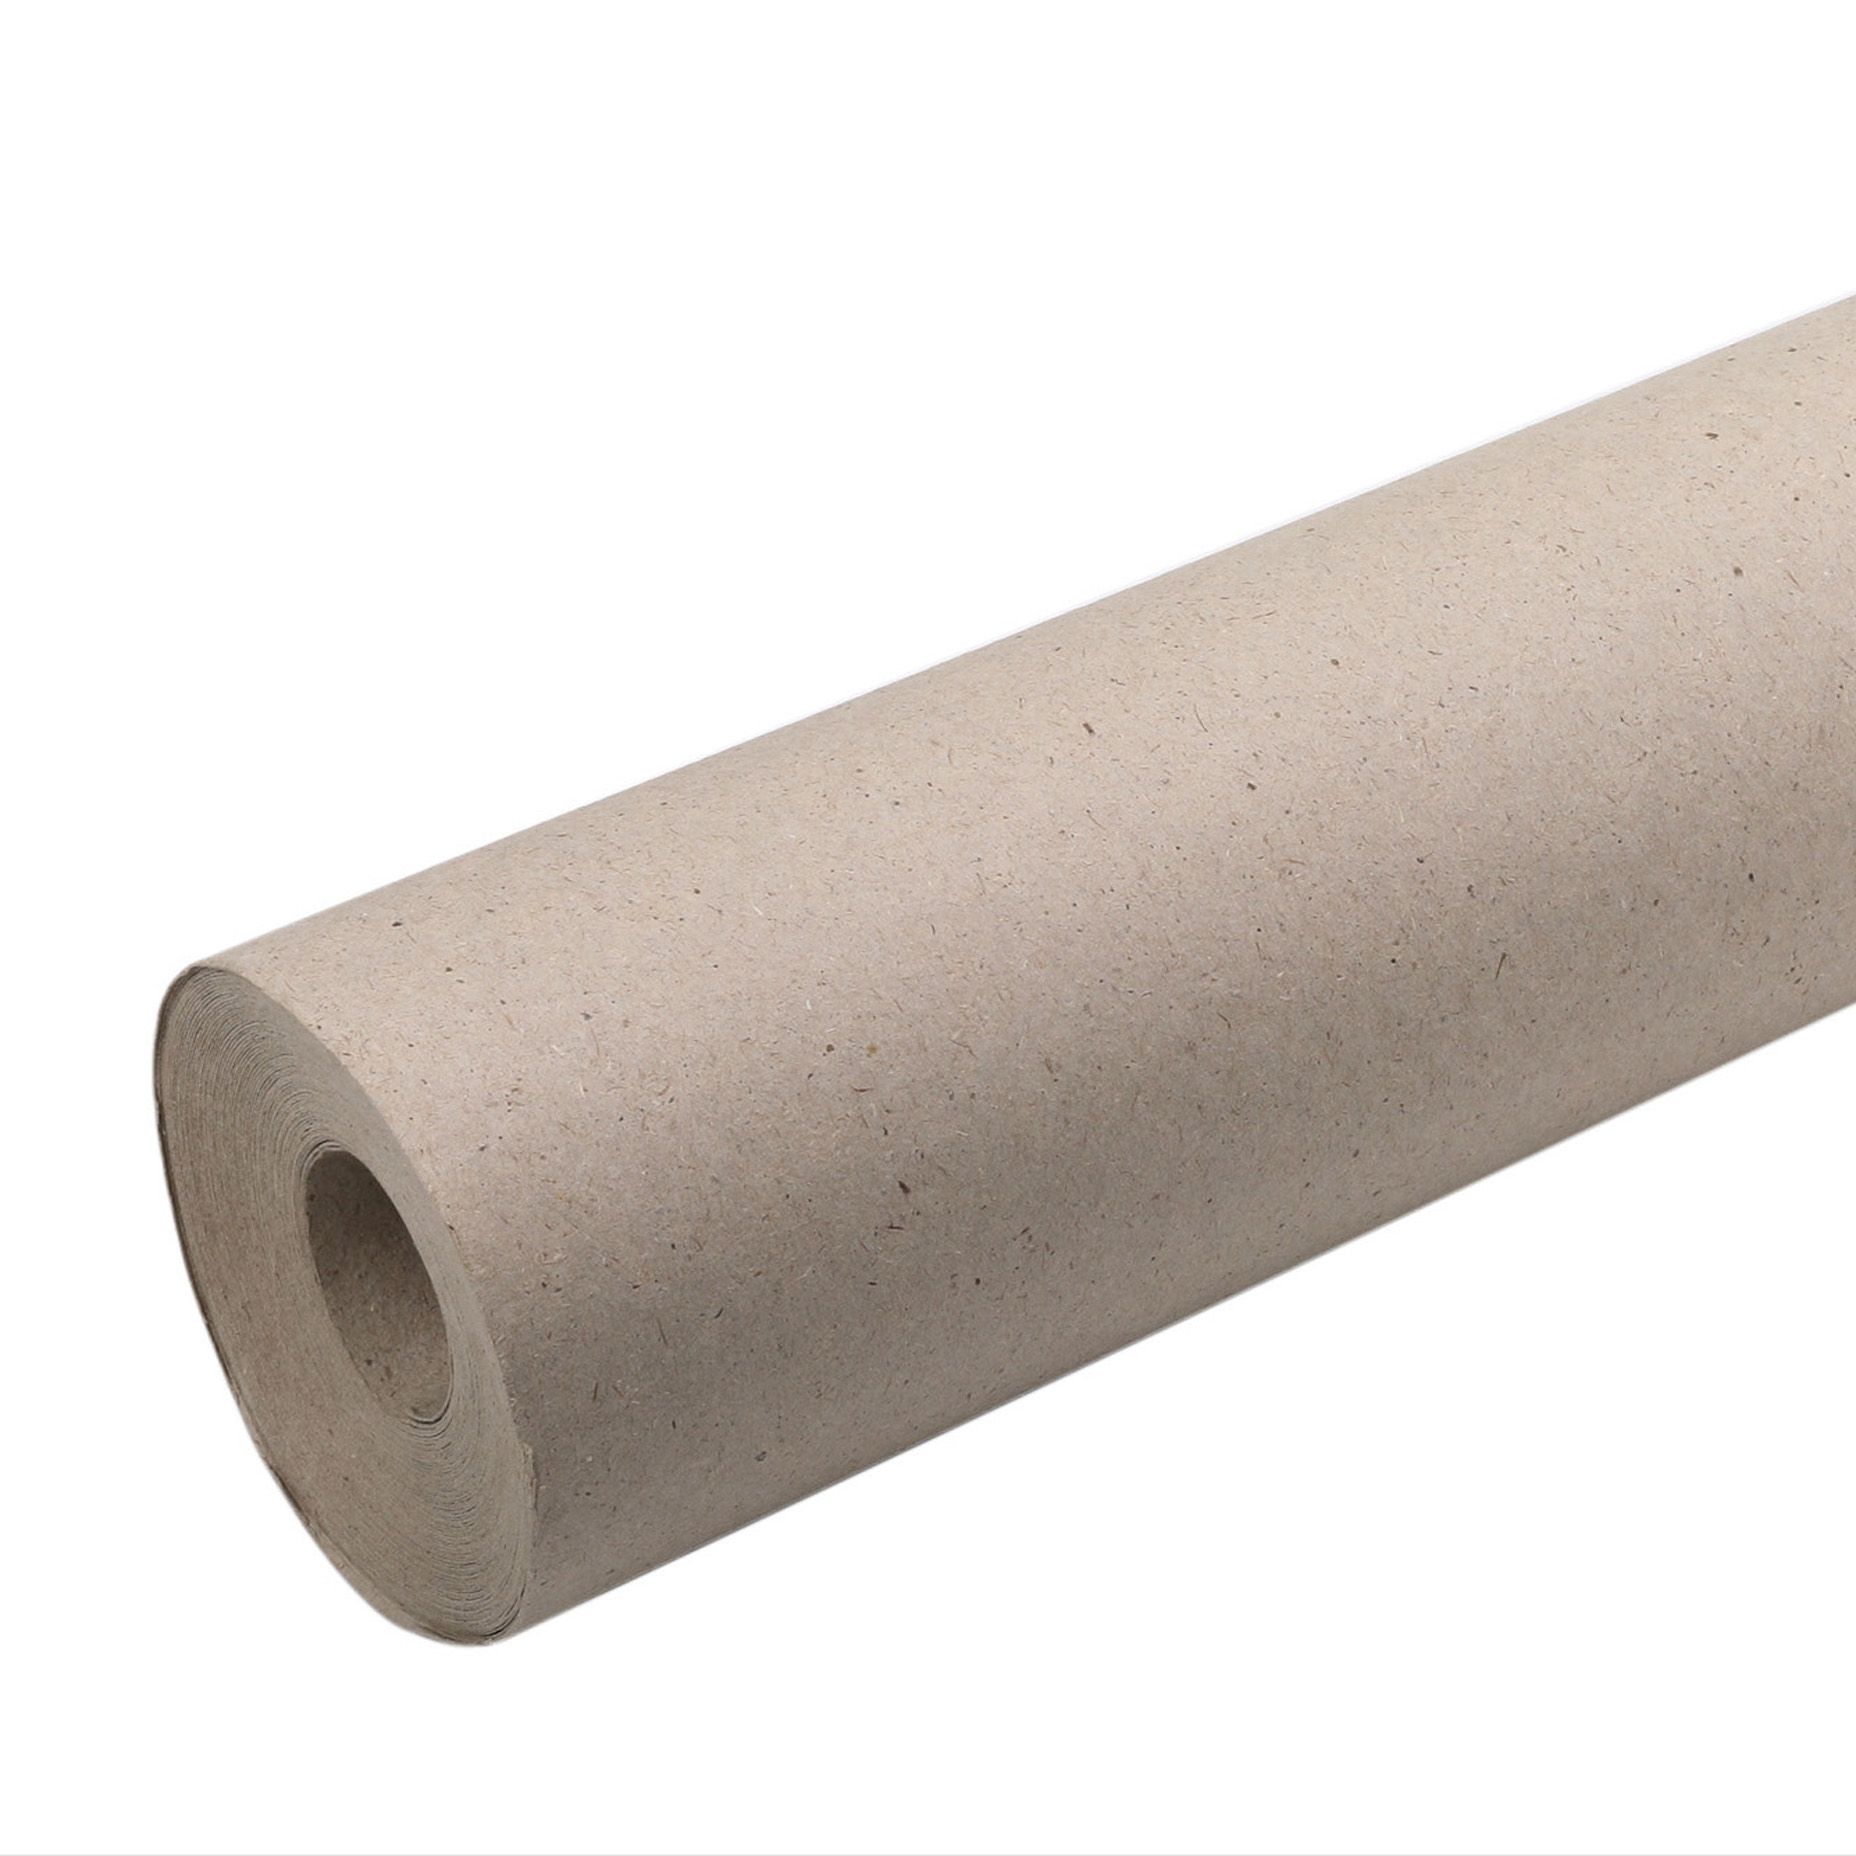 900mm Wide Wax Coated Kraft Paper Rolls - For Protecting Pictures